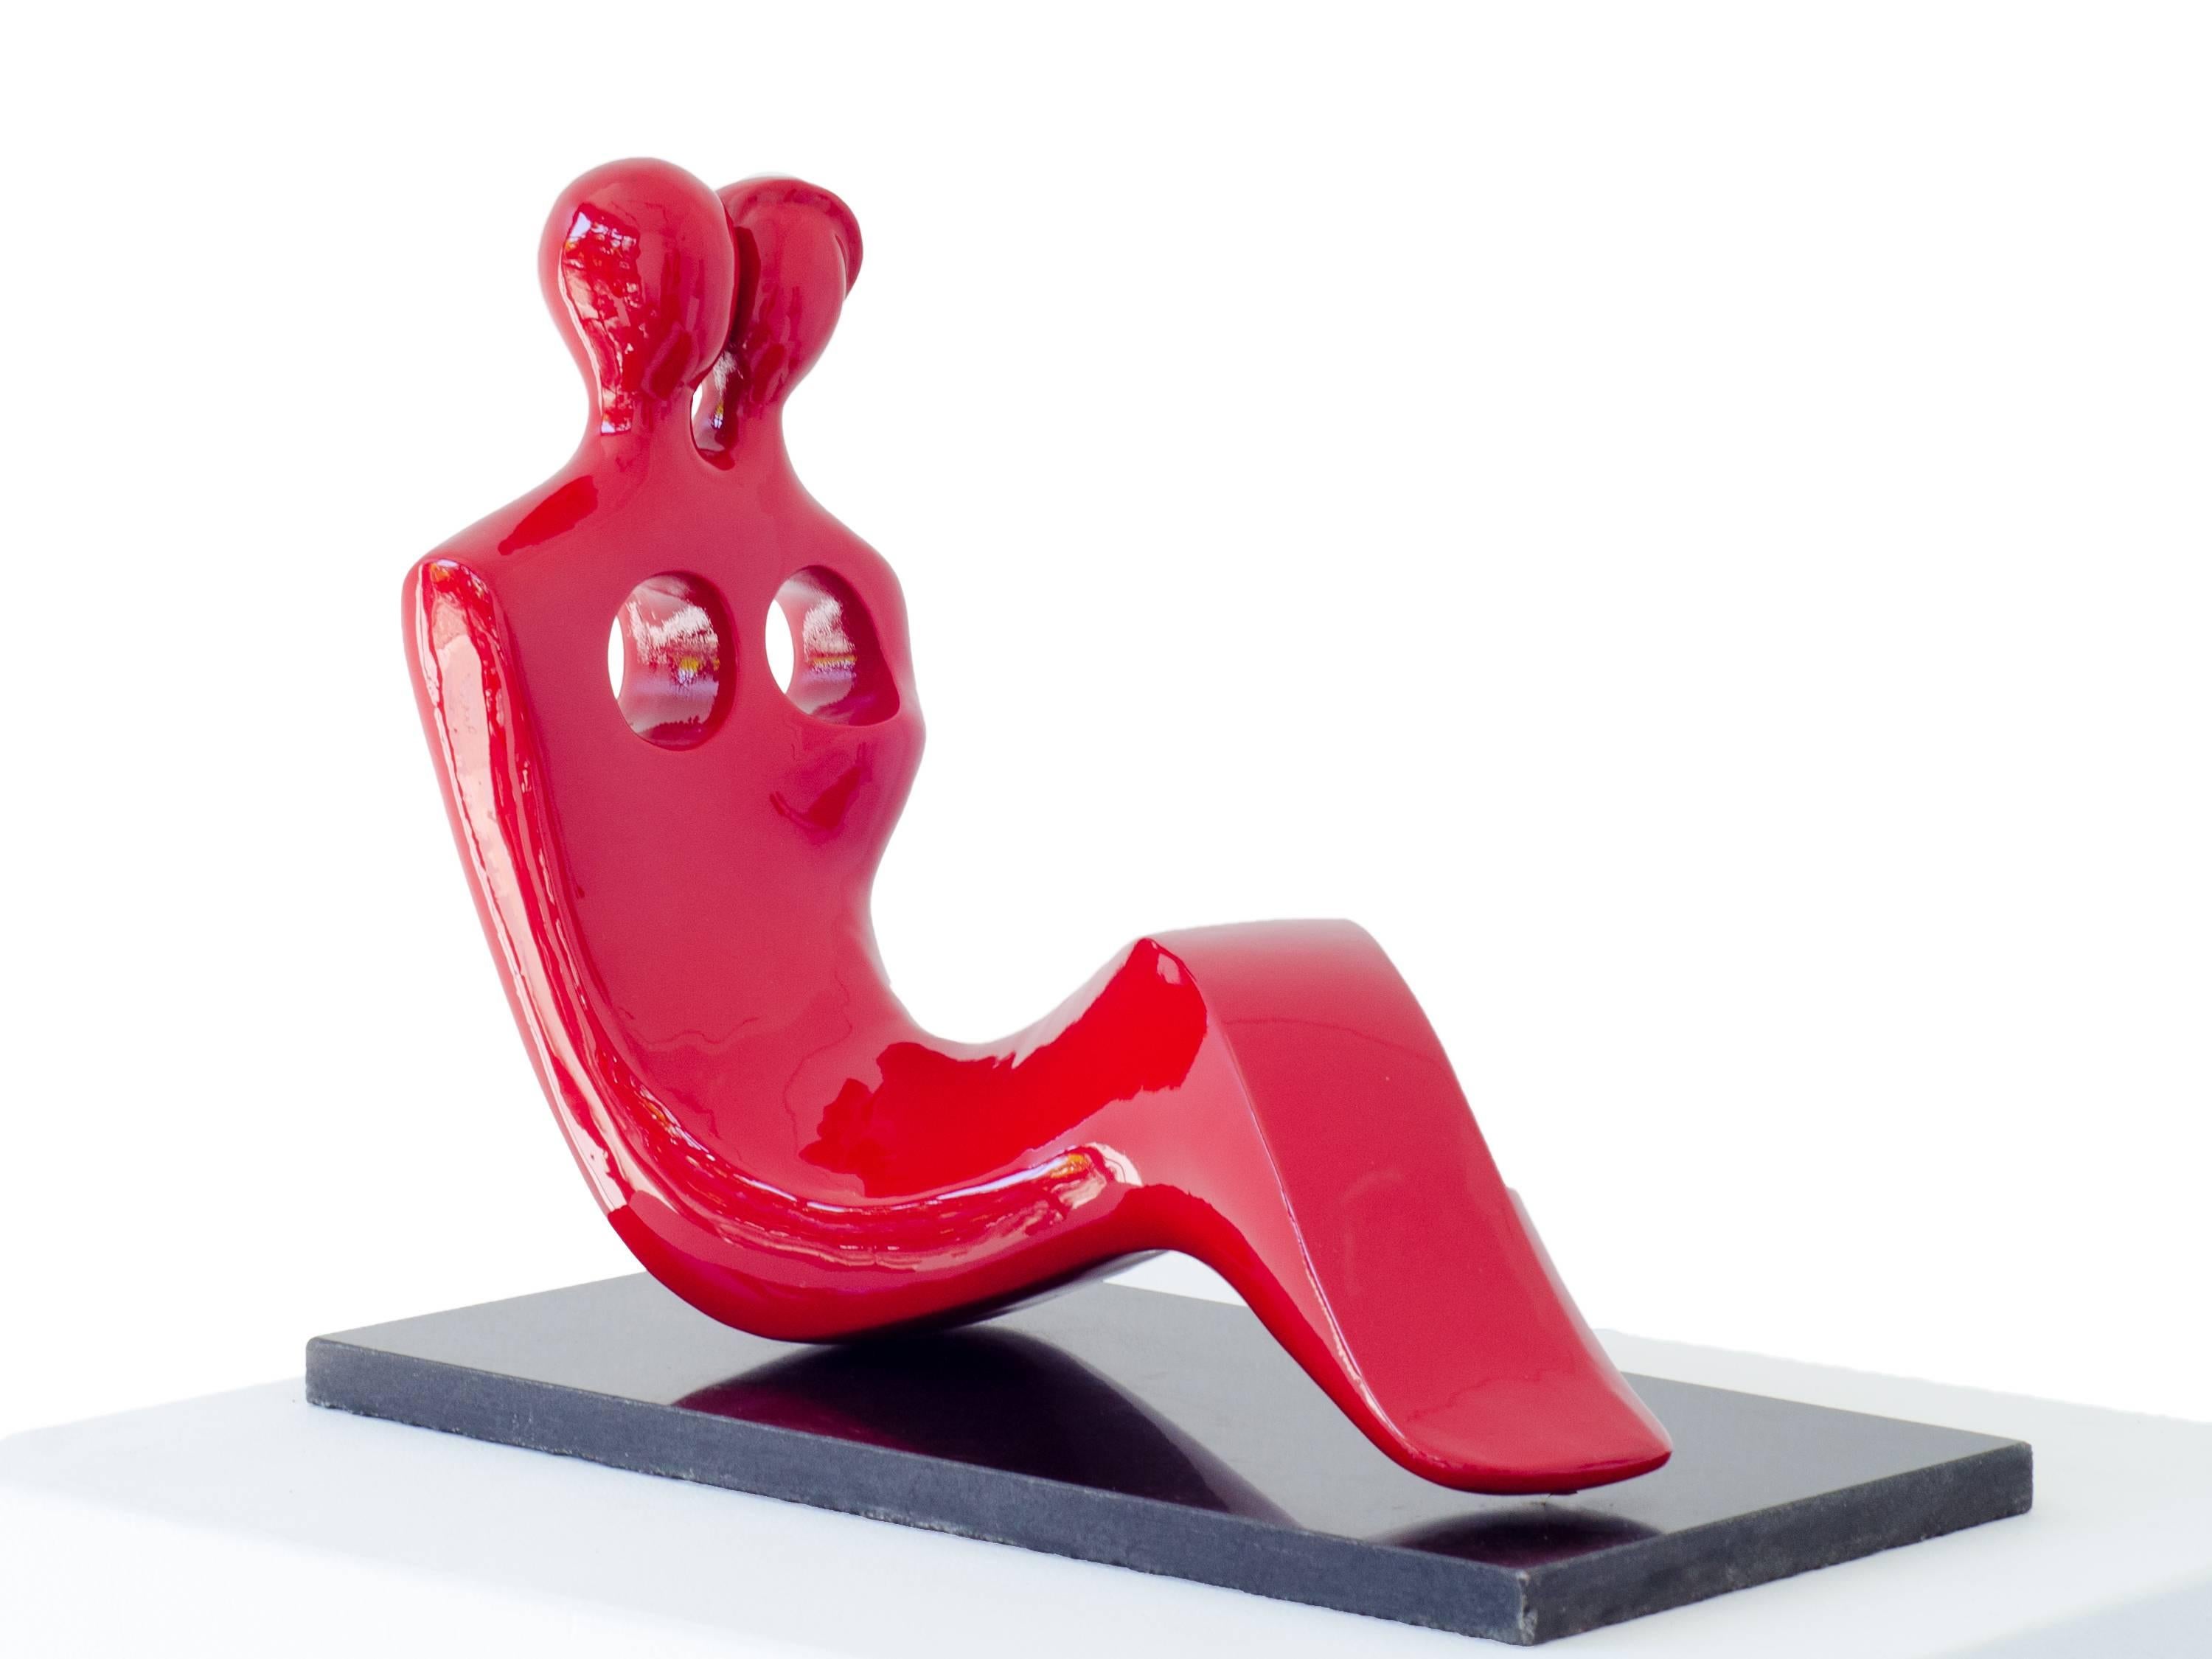 Beatriz Gerenstein Abstract Sculpture - Soul Mates #3 (in red). When in love, their souls and bodies fuse into just one.